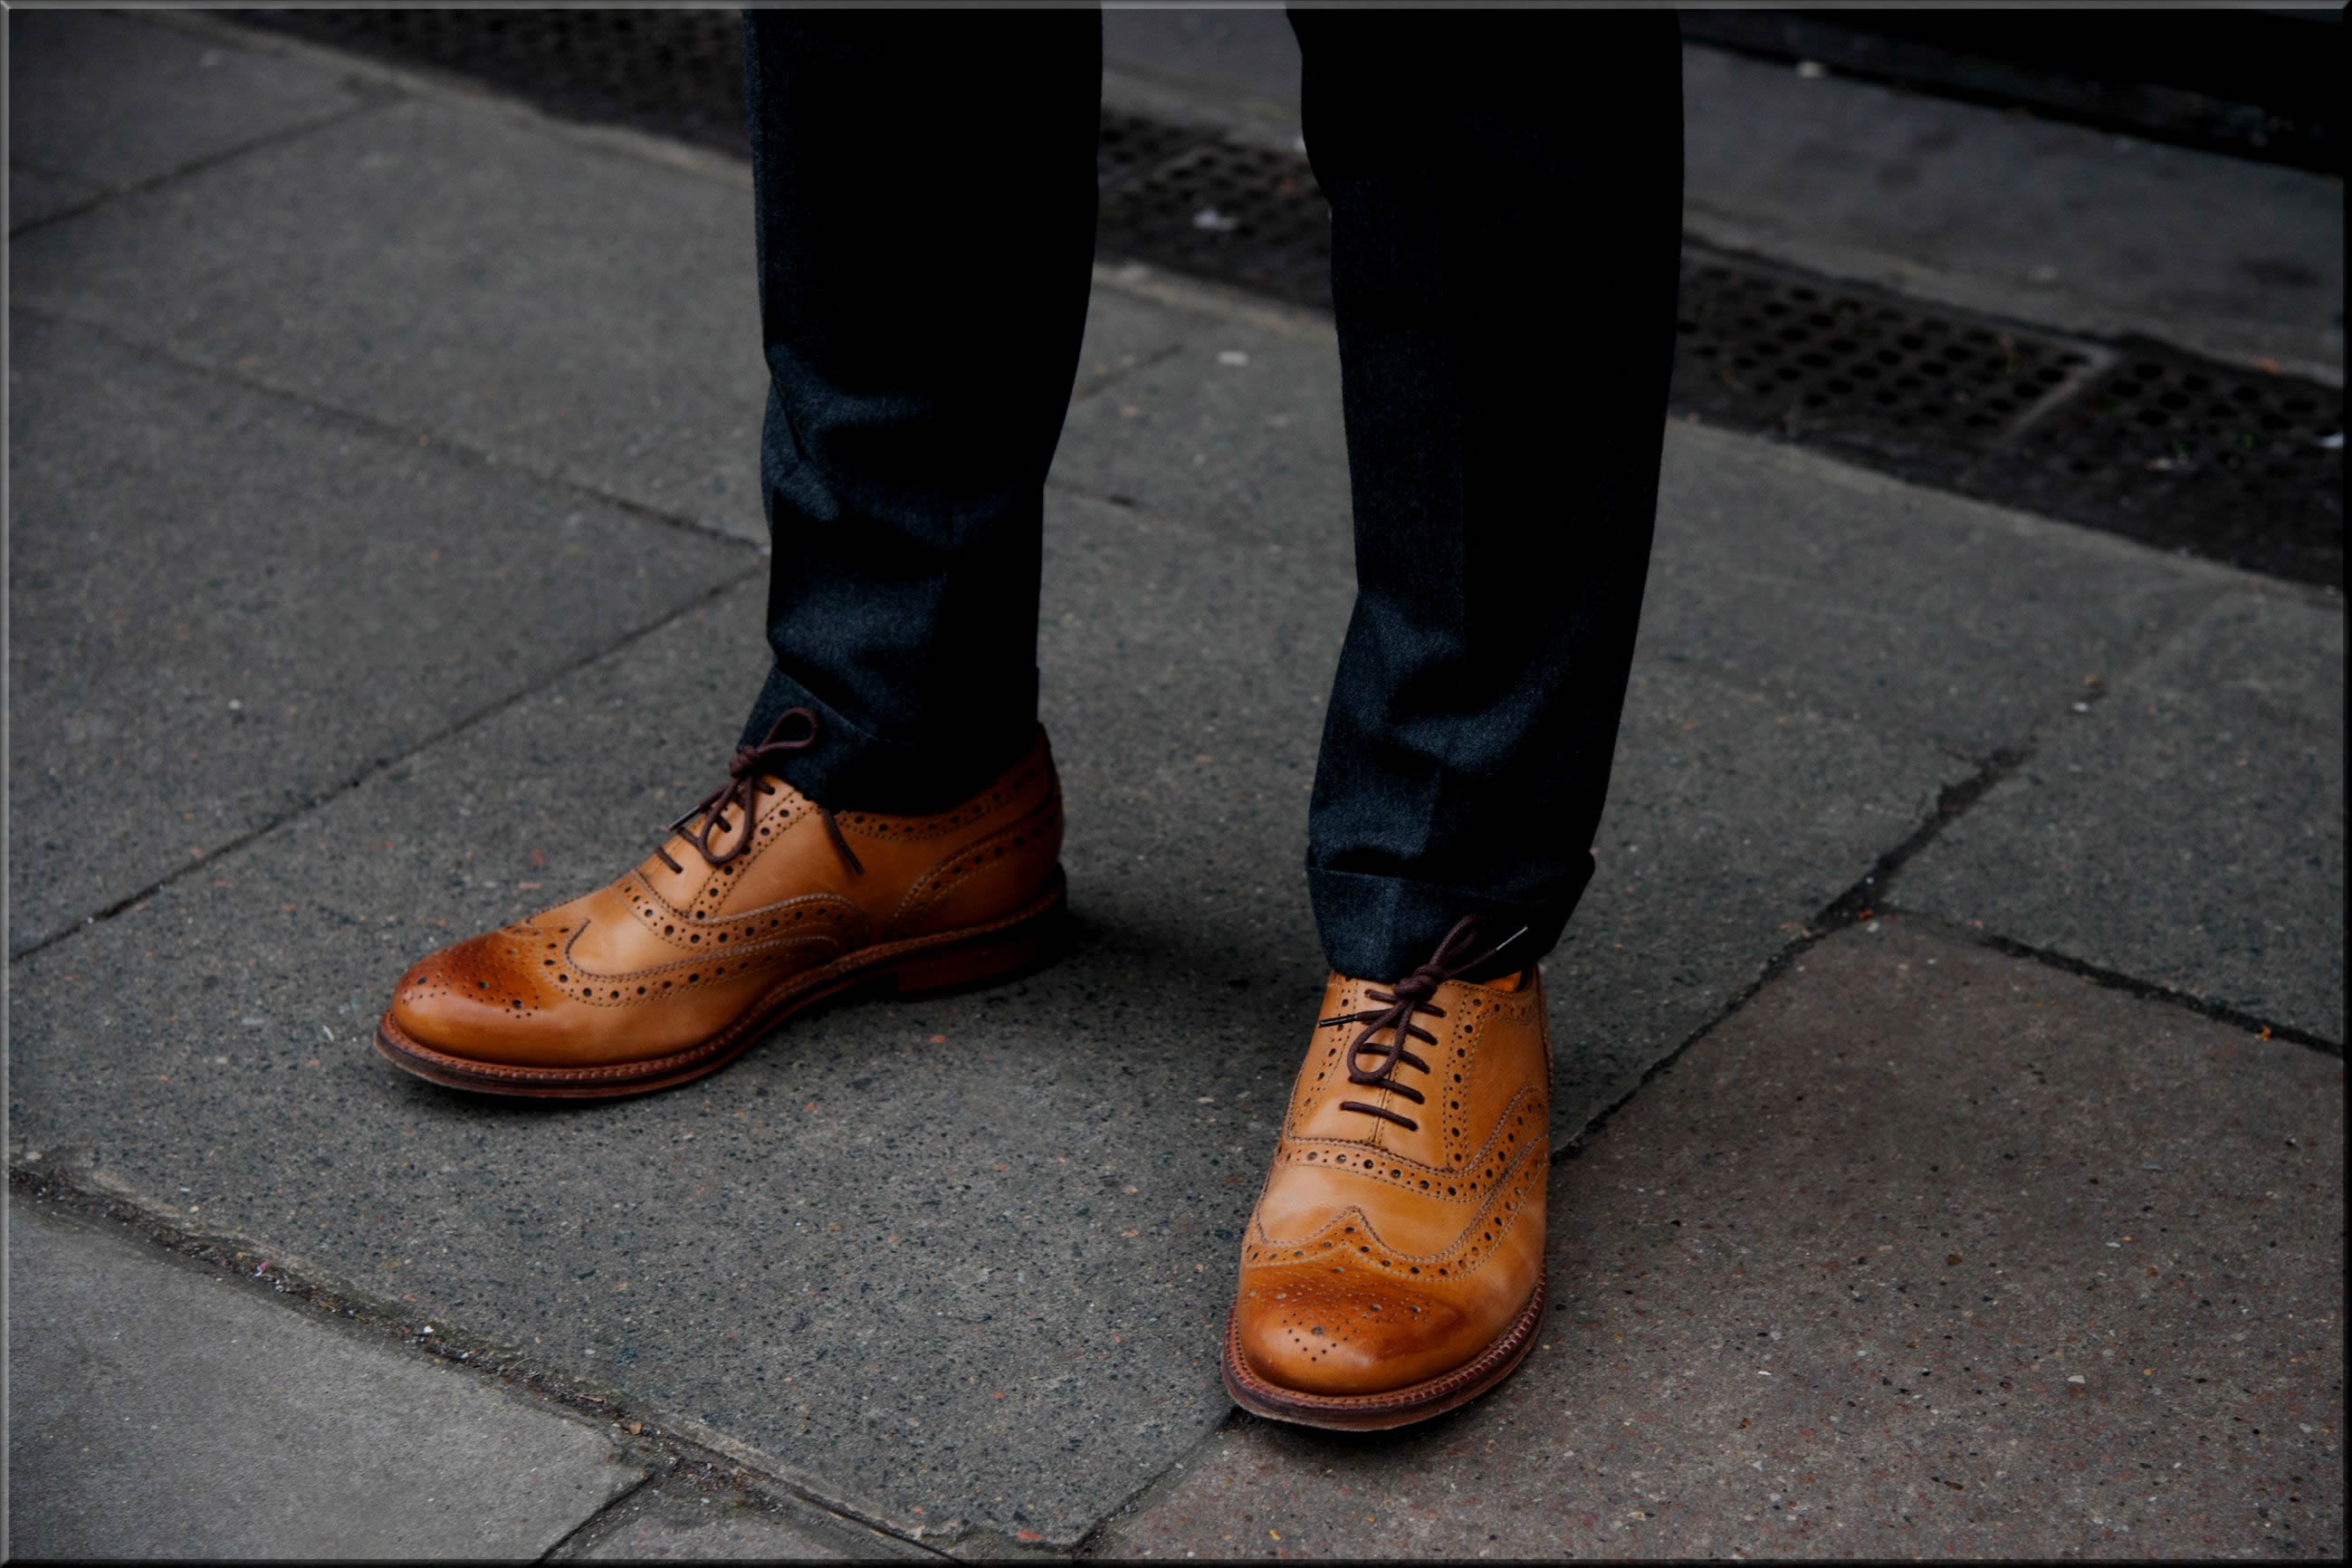 9 Best Business Casual Shoes for Men in the Workplace [2022 Guide]